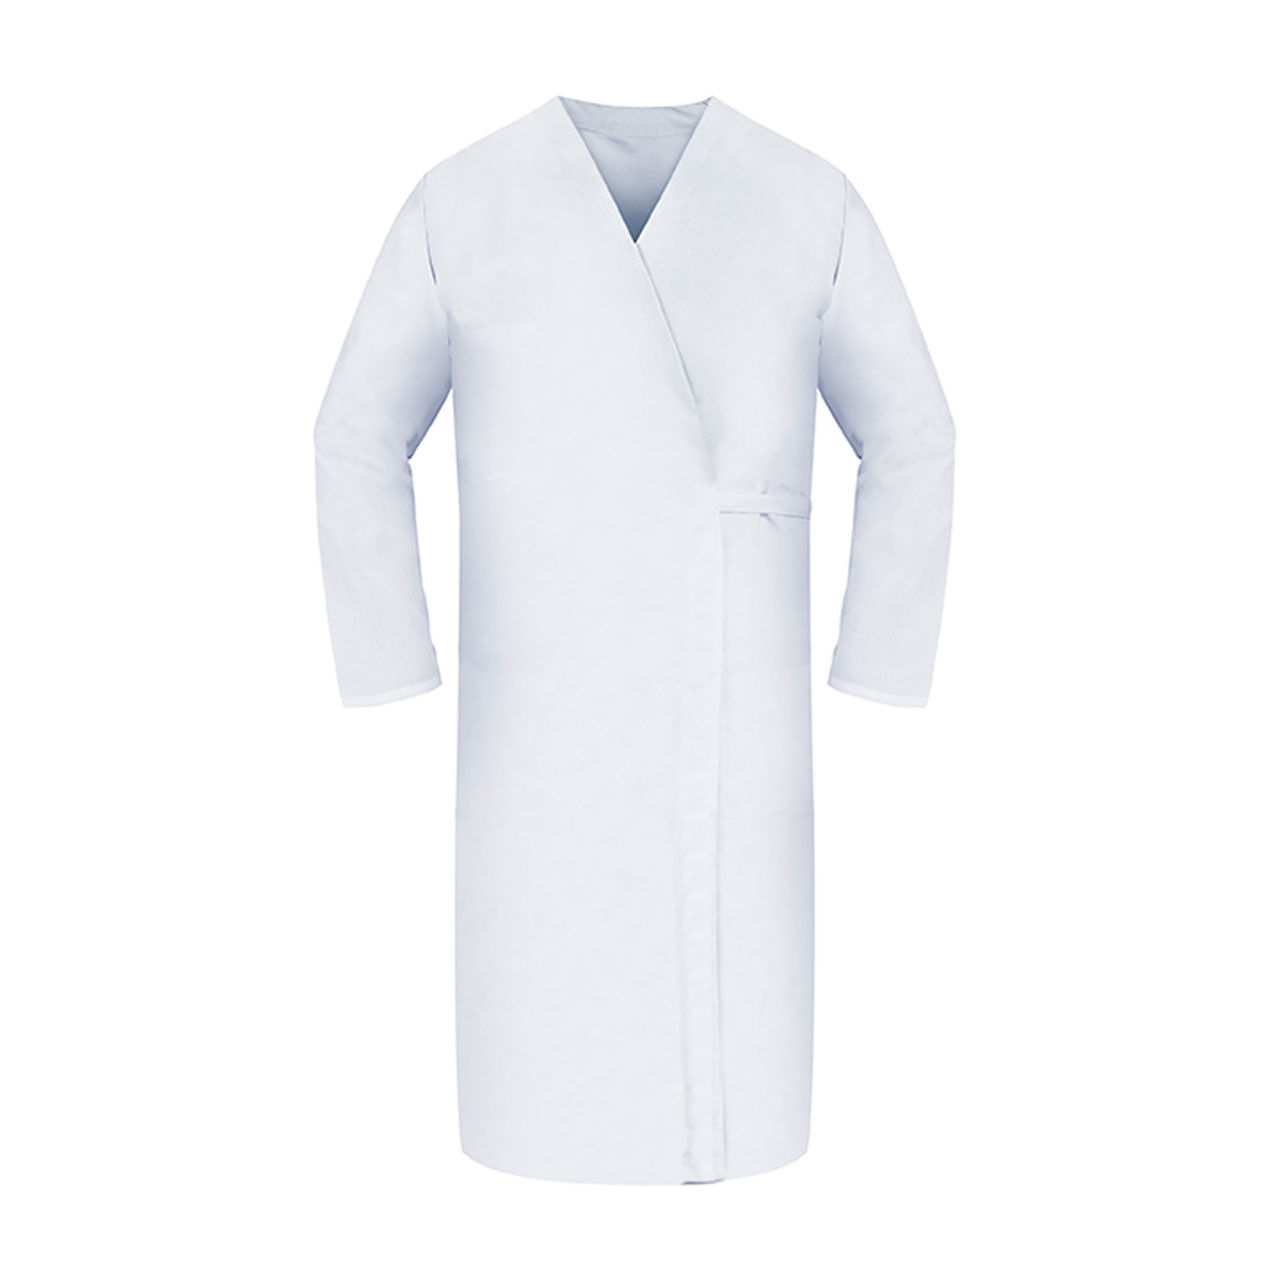 What white smock sizes can I get for the HACCP Long Sleeve Smock Wraps?